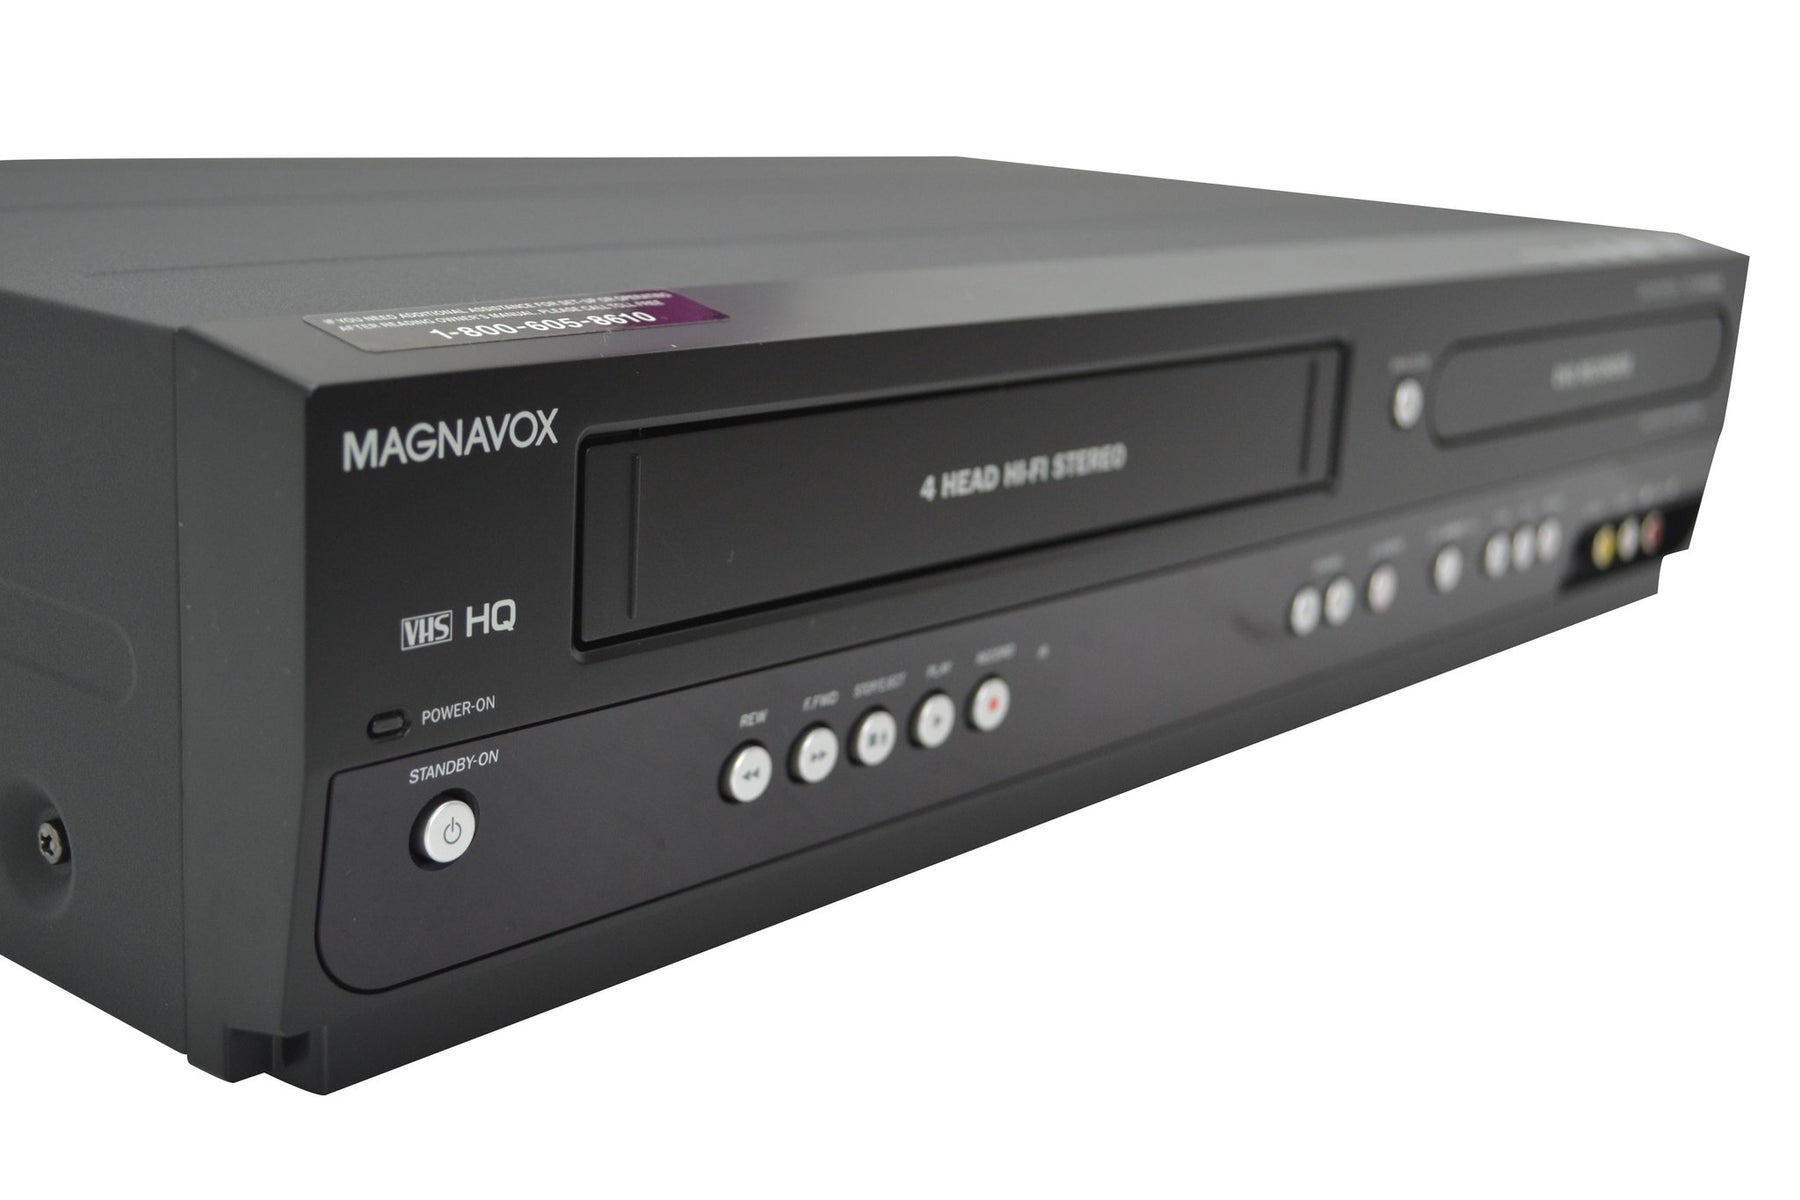 vcr dvd combo players